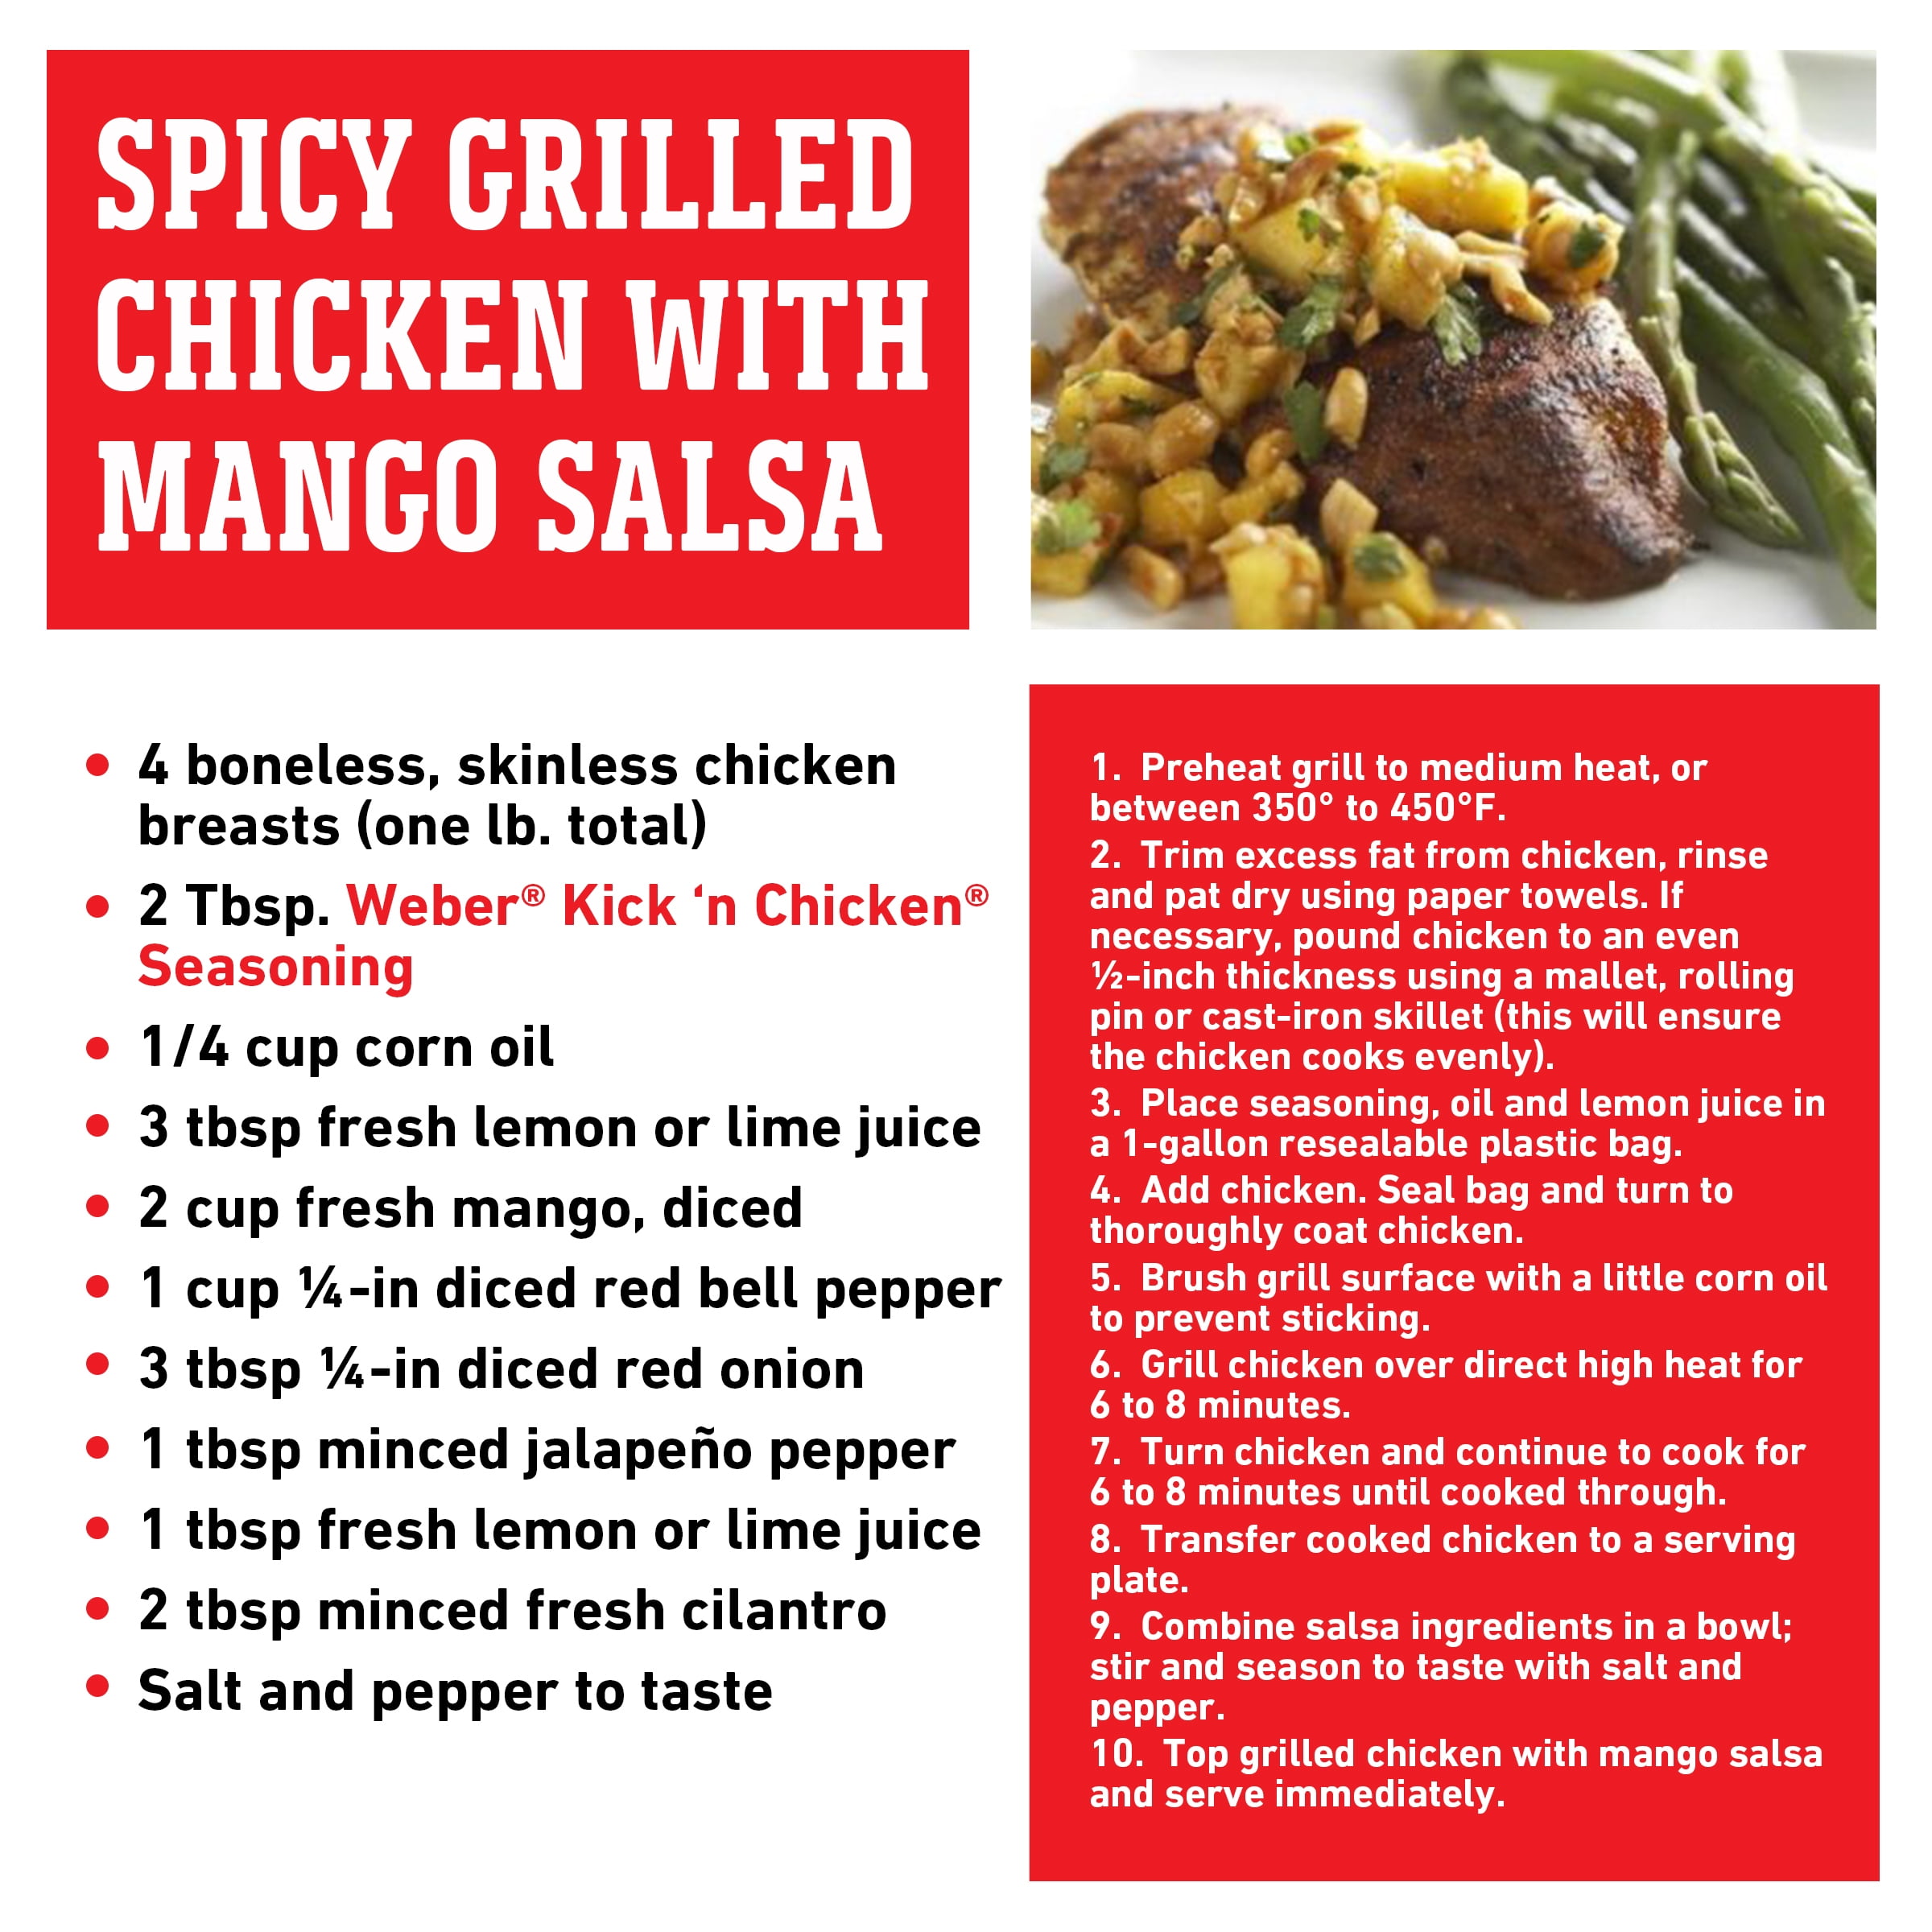 Weber Kick'n Chicken Seasoning 22 Oz. Made with Sea Salt - No MSG - Gluten  Free - Perfect for Grilling 